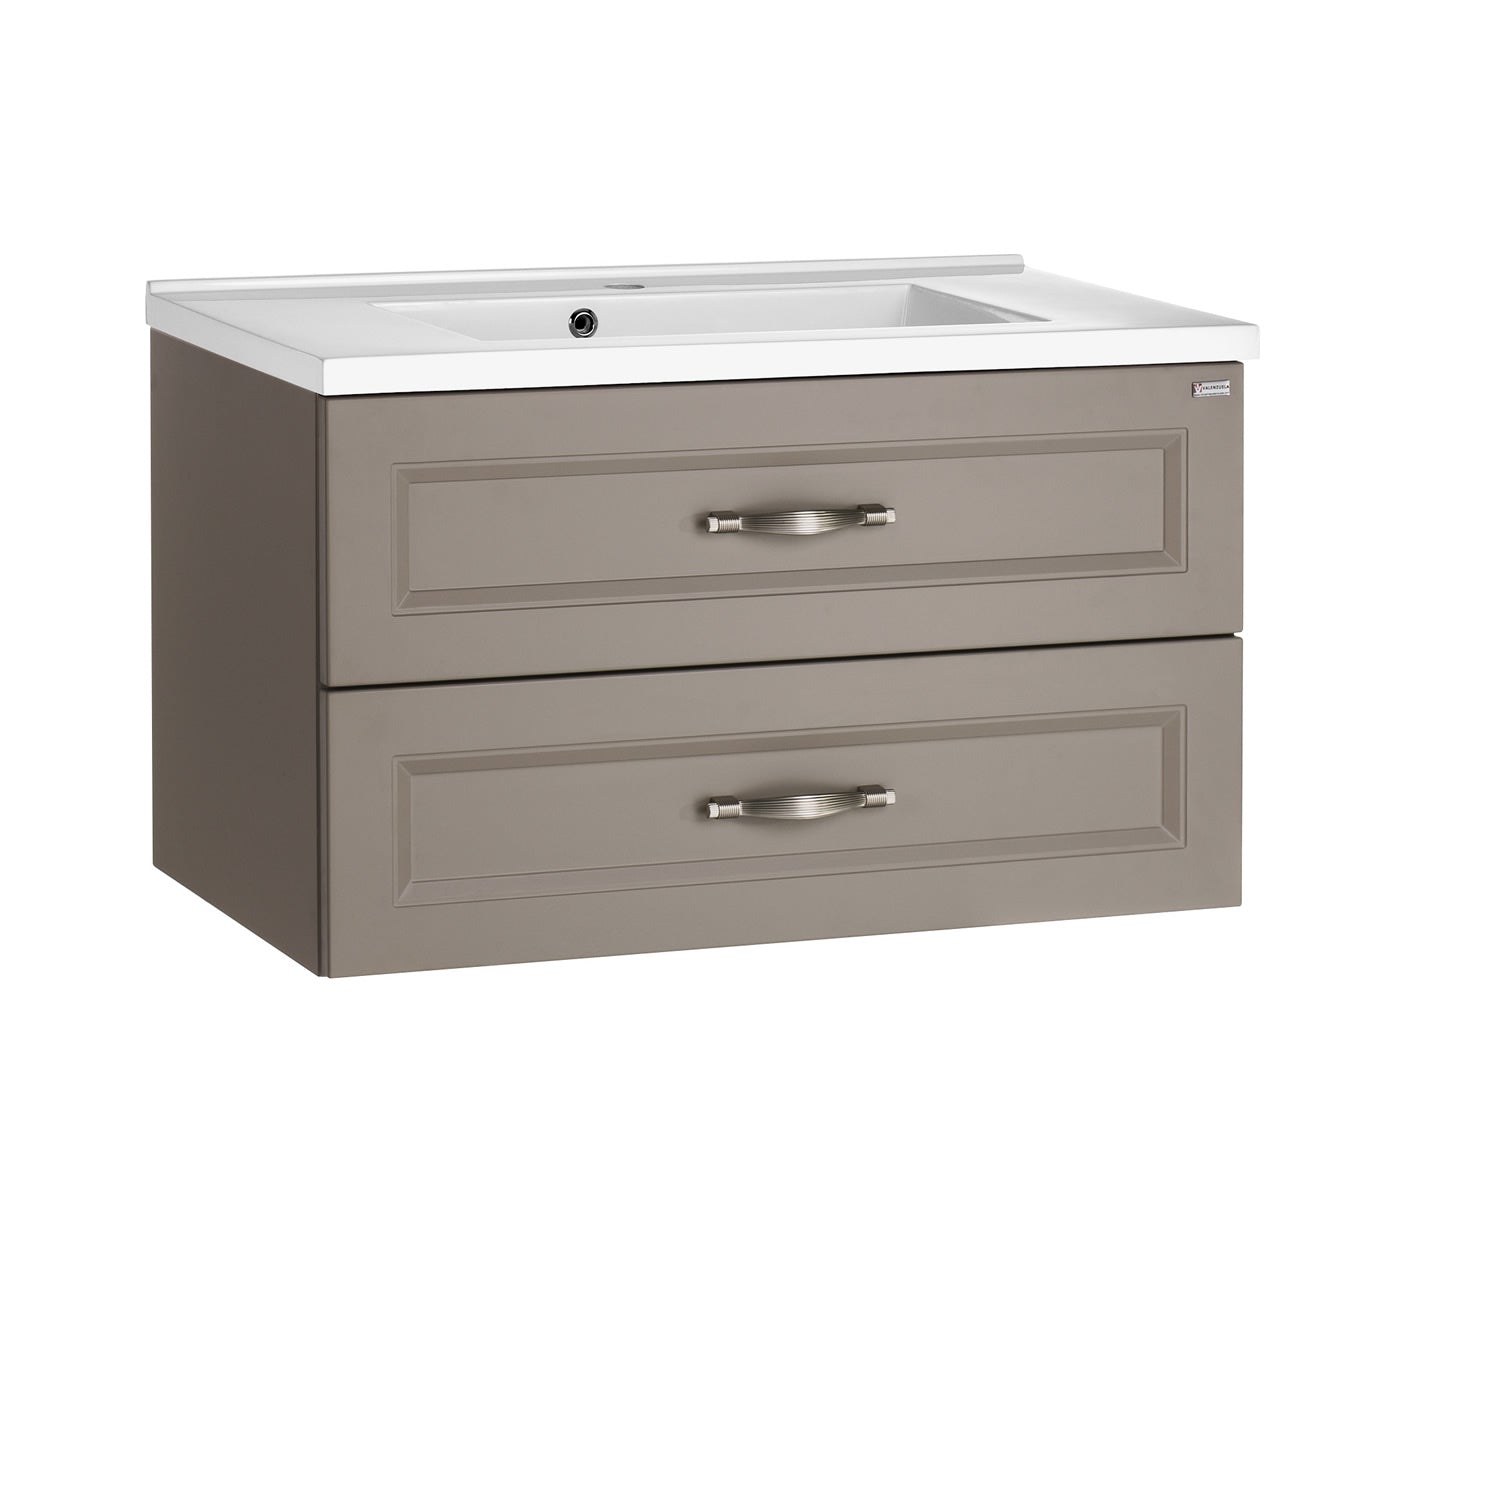 24" Single Vanity, Wall Mount, 2 Drawers with Soft Close, Mink Matt, Serie Class by VALENZUELA